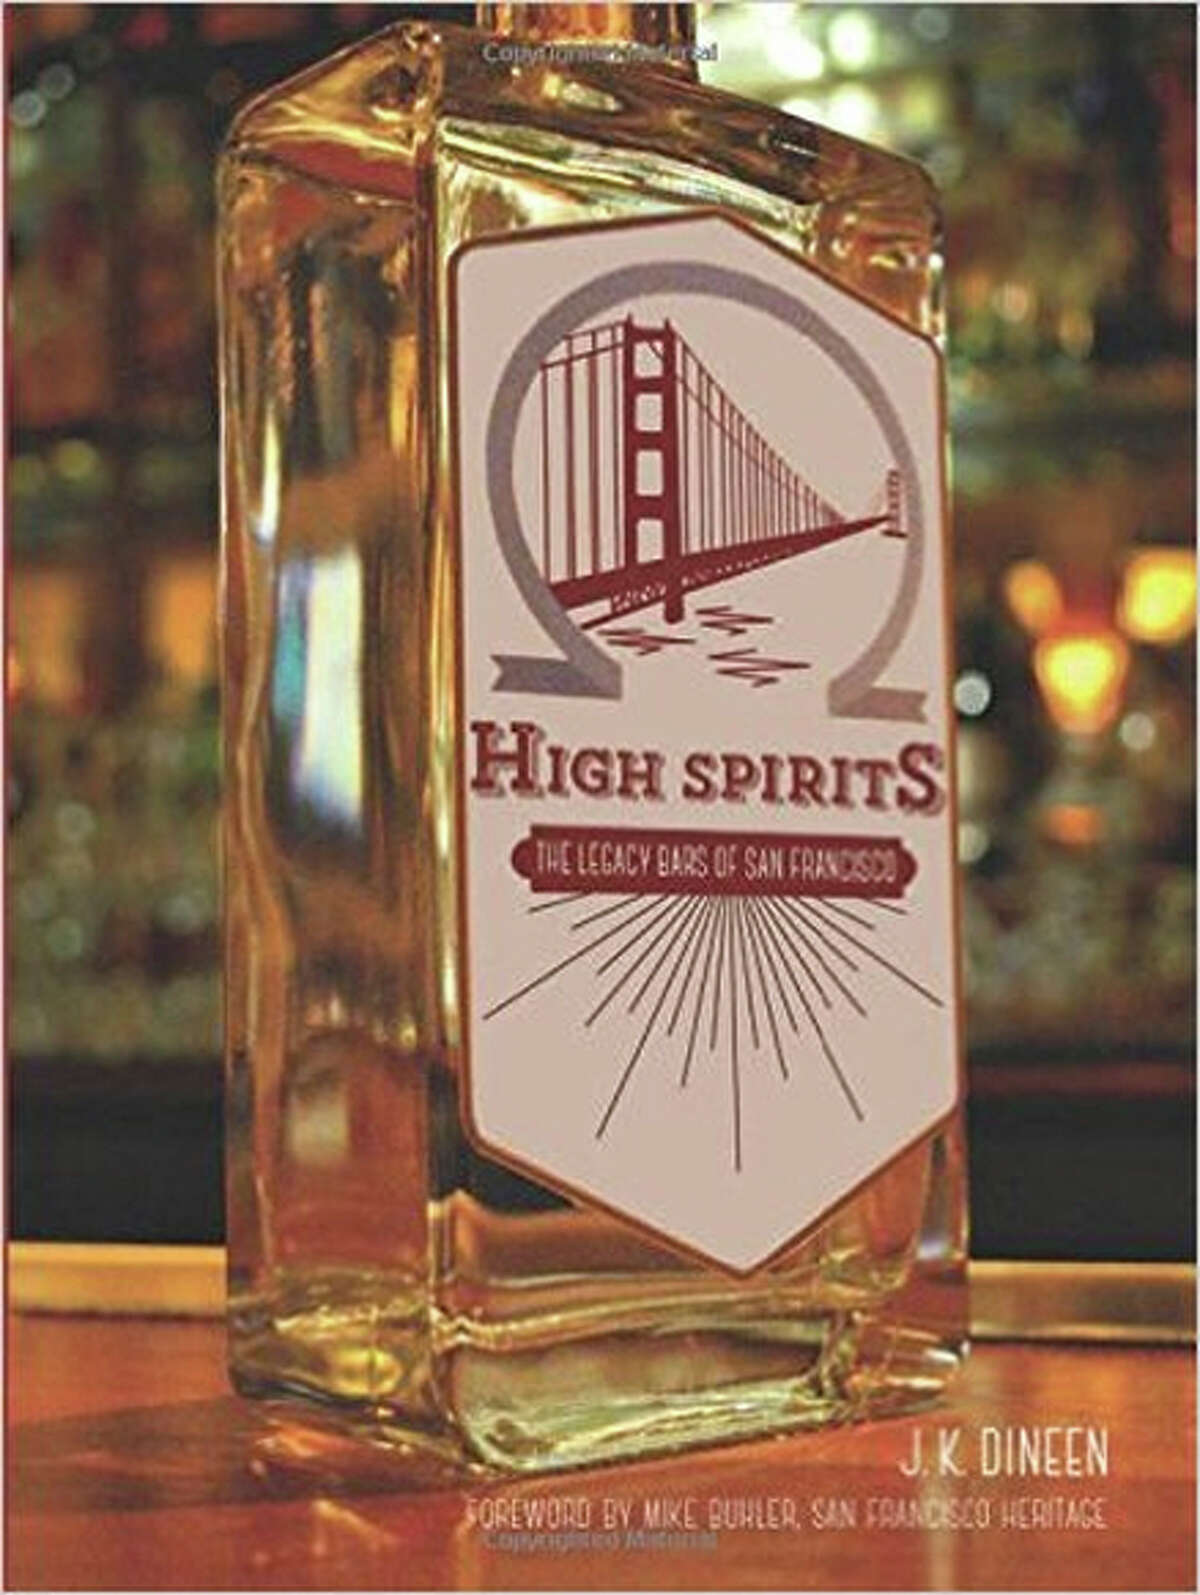 “High Spirits: The Legacy Bars of San Francisco” by J.K. Dineen.